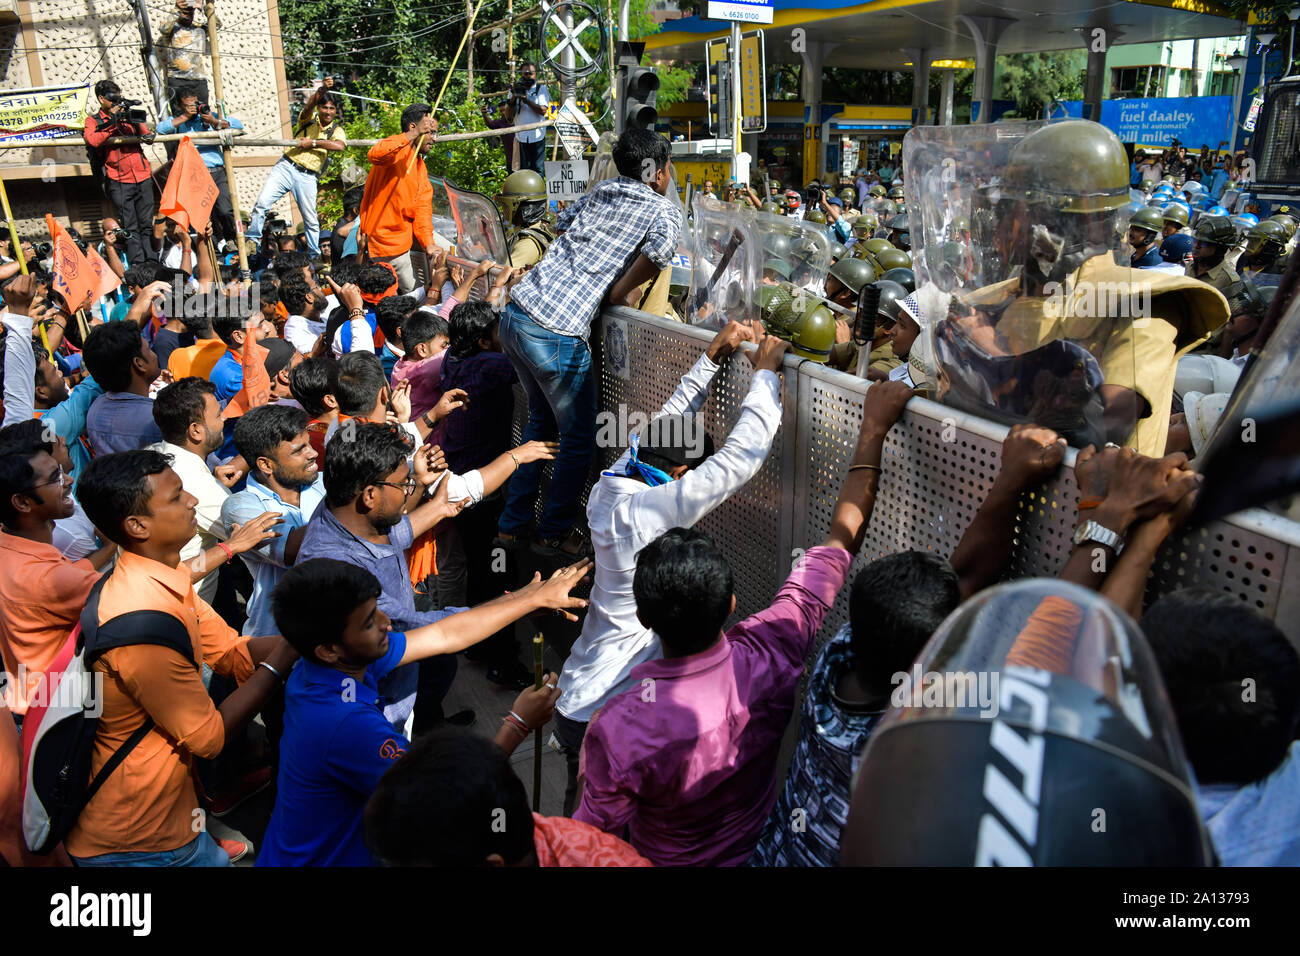 Akhil Bharatiya Vidyarthi Parishad (ABVP) activists try to push through a police barricade as police stop the ABVP's march to Jadavpur University.Akhil Bharatiya Vidyarthi Parishad (ABVP) the right wing students' organisation took out a rally to protest against the September 19 attack on the Union Minister Babul Supriyo in Jadavpur University campus. Stock Photo